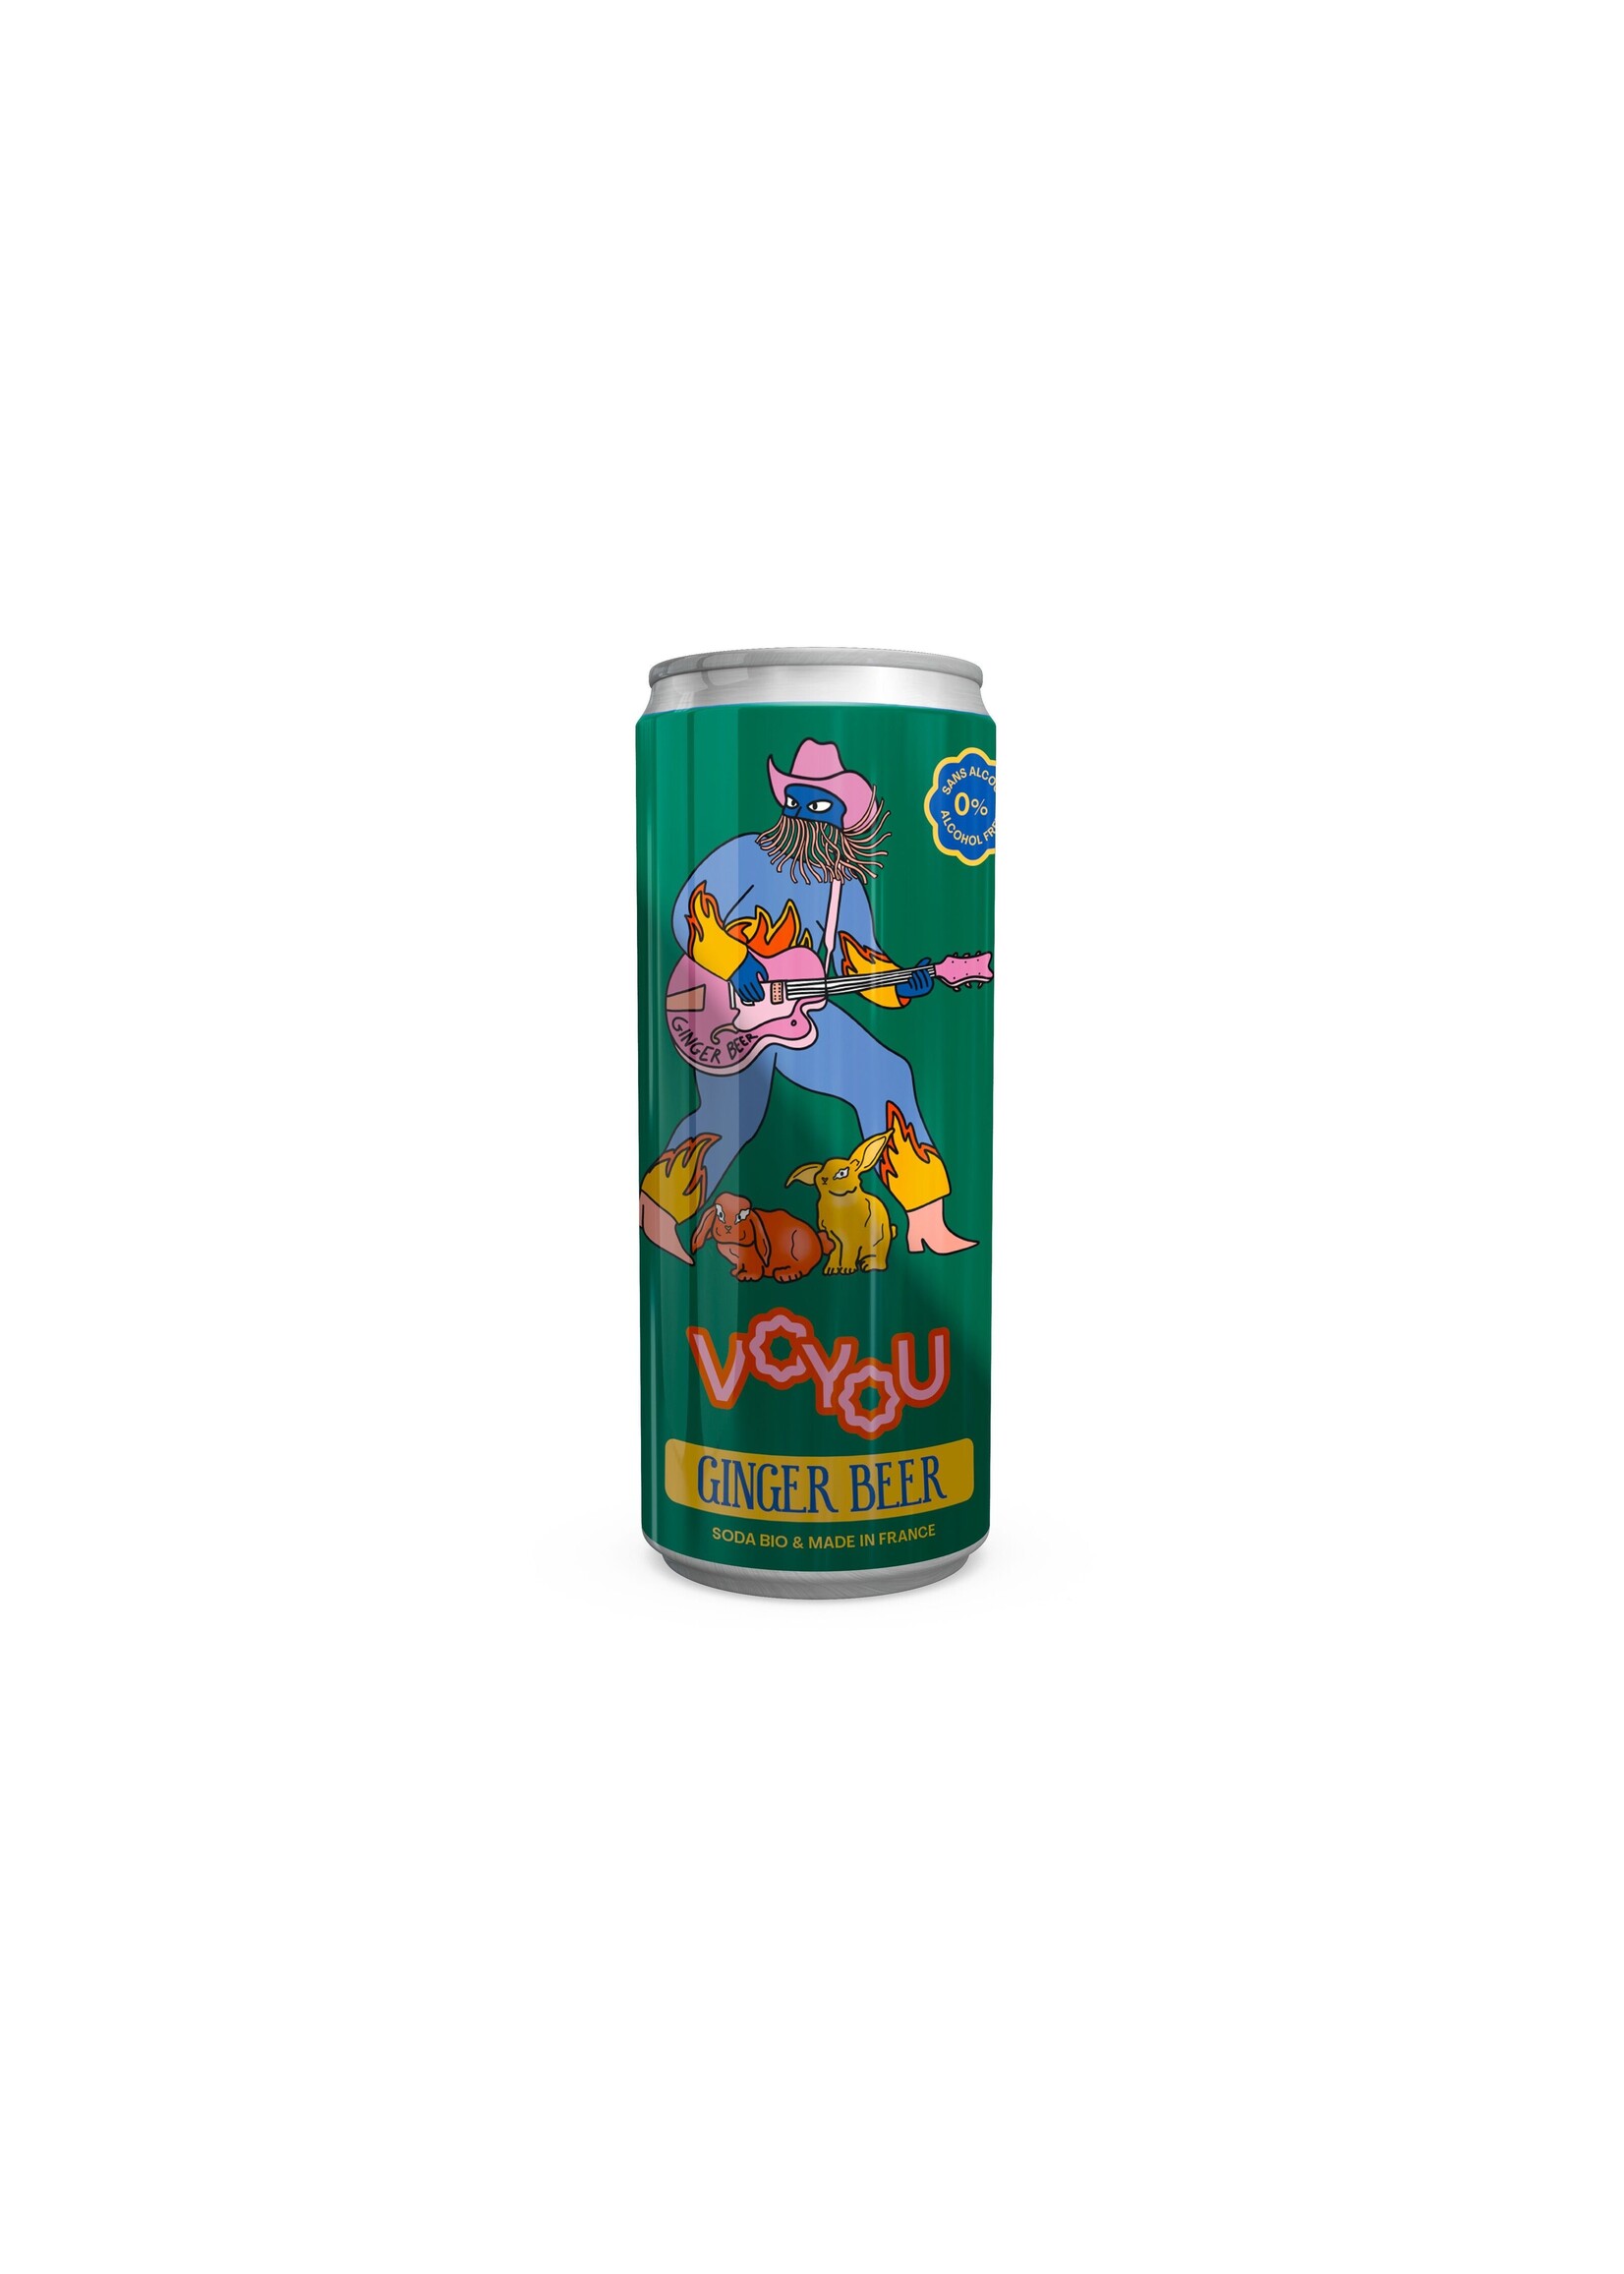 Les Intenables Les Intenables - Voyou - Ginger Beer - 25cl